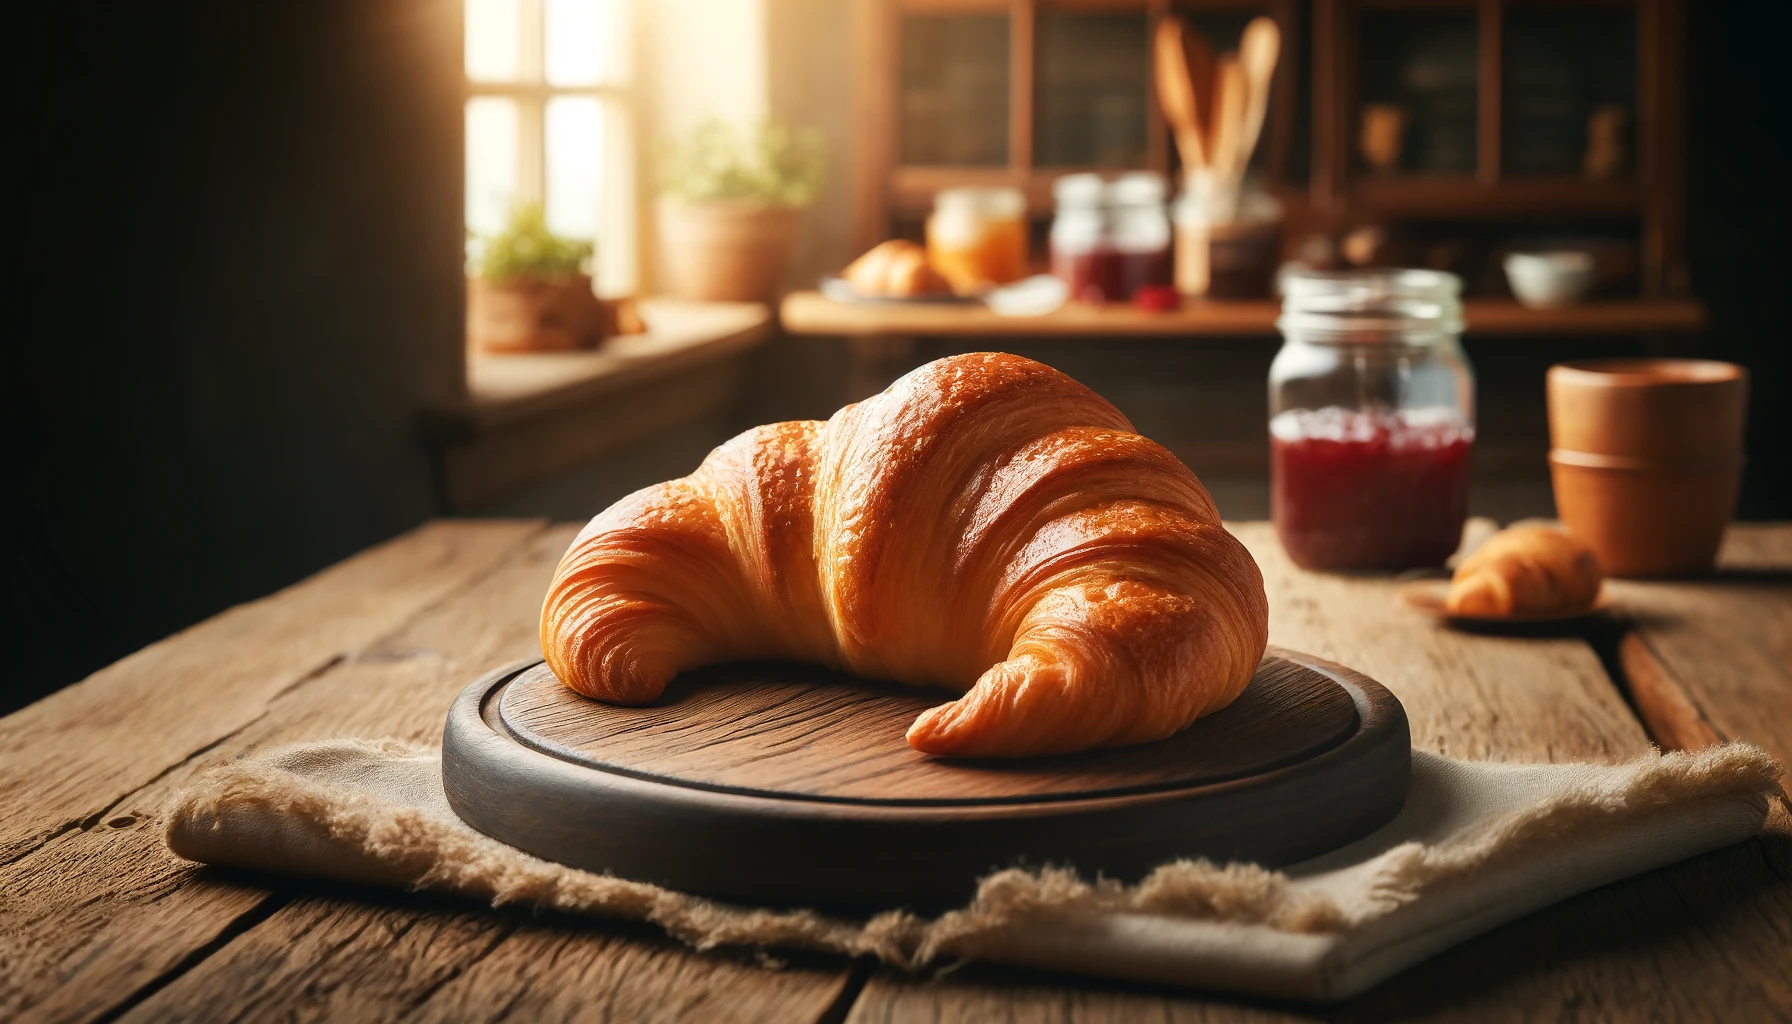 A traditional curved French butter croissant, golden brown and flaky, placed on a wooden cutting board in a cozy kitchen setting. The croissant should be in the shape of a crescent moon, showcasing its layers and buttery texture. The background features rustic elements like a wooden table, jars of jam, and soft, warm light streaming through a window. The focus is on the croissant, emphasizing its classic curved shape and delicious appearance.